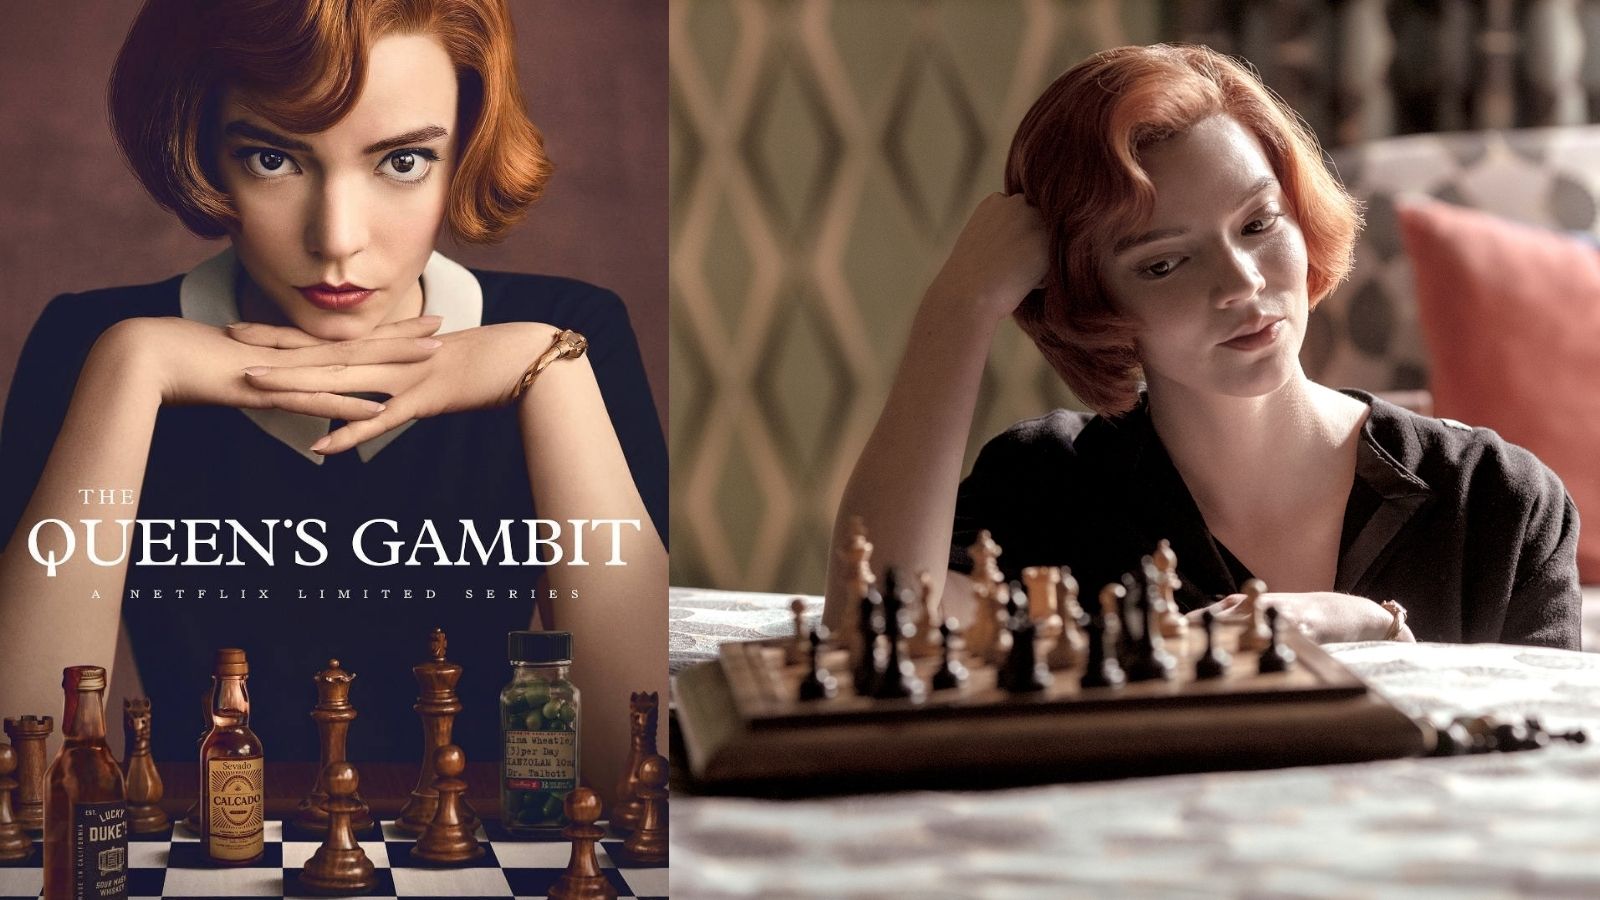 The Queen's Gambit is out on Netflix